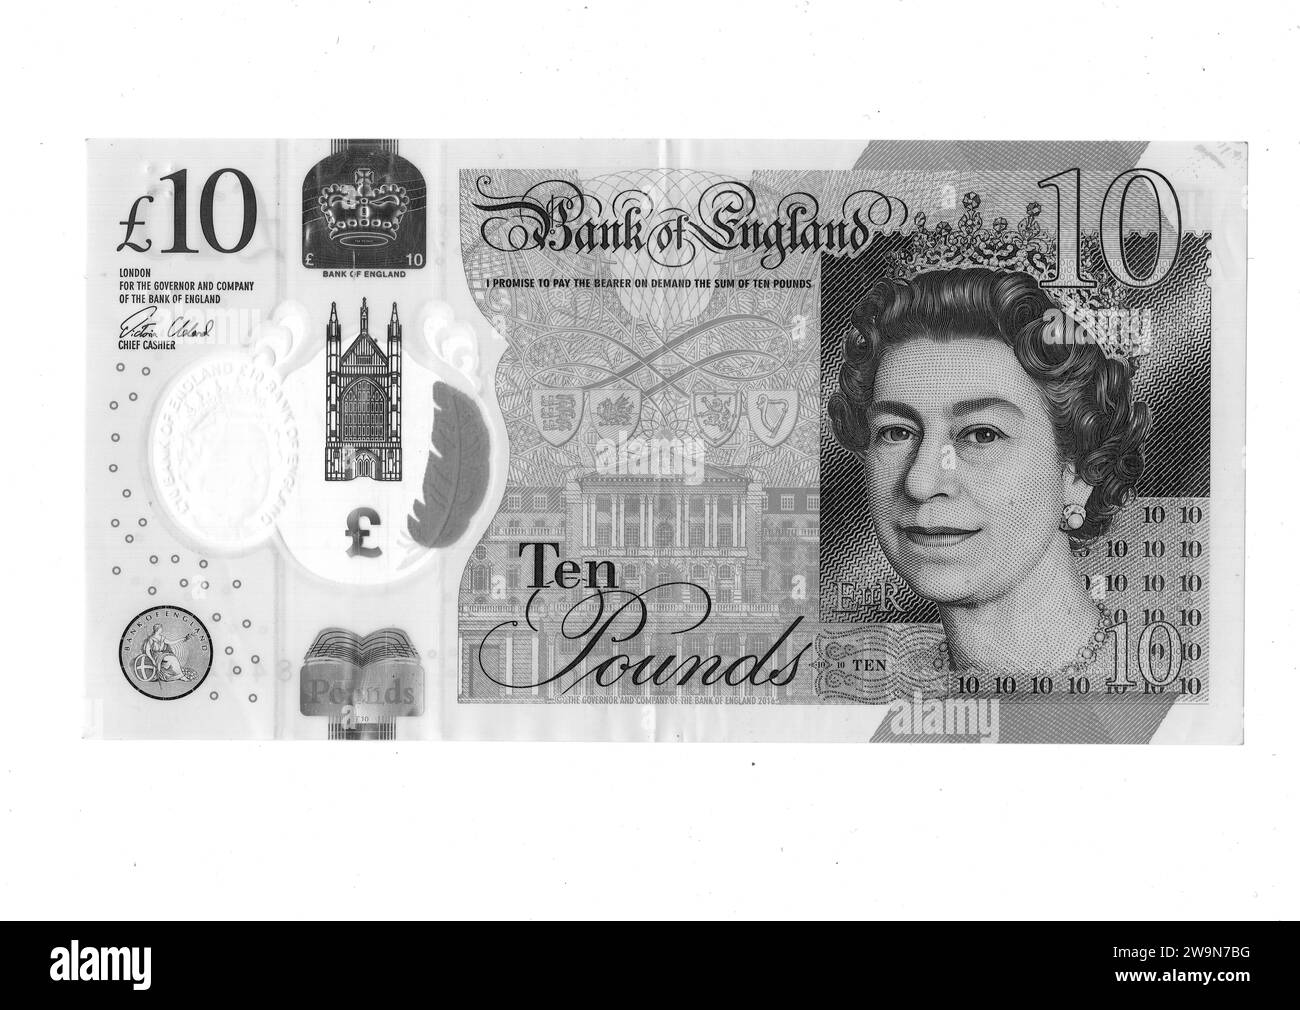 The front of a ten pound note featuring a portrait of Queen Elizabeth II from the United Kingdom on a white background. Stock Photo